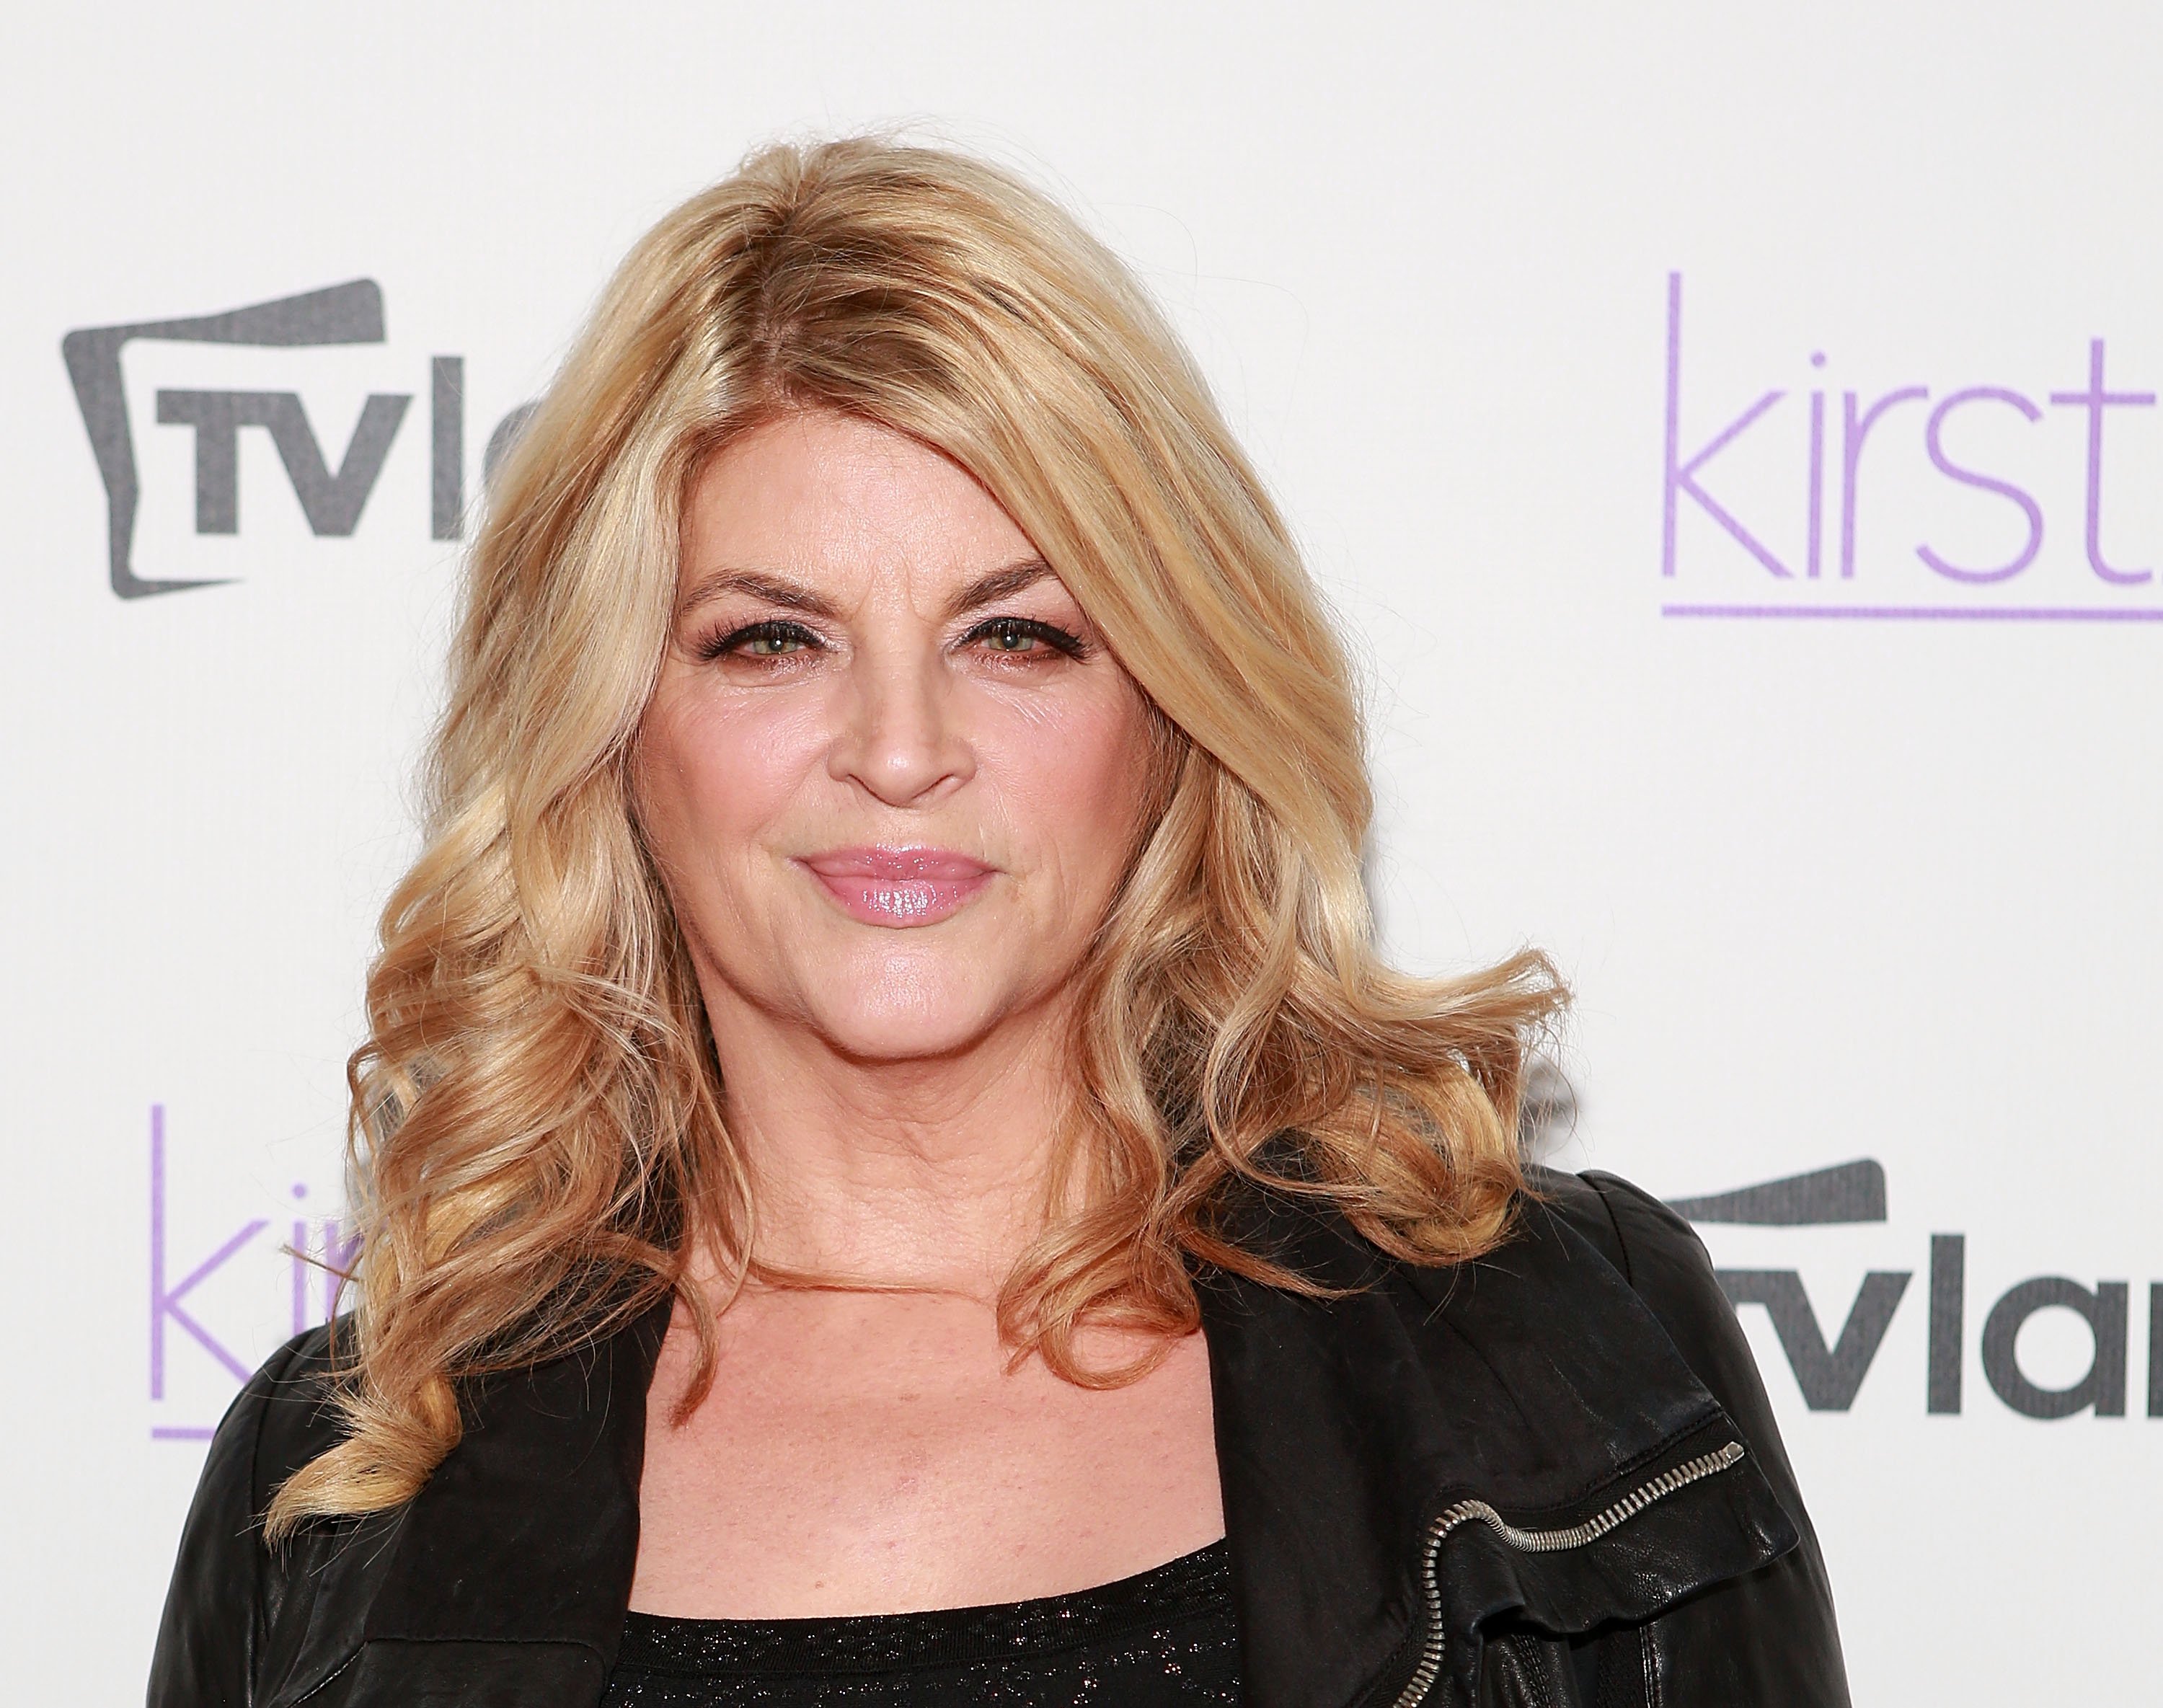 Kirstie Alley attends the "Kirstie" premiere party at Harlow on December 3, 2013 in New York City.